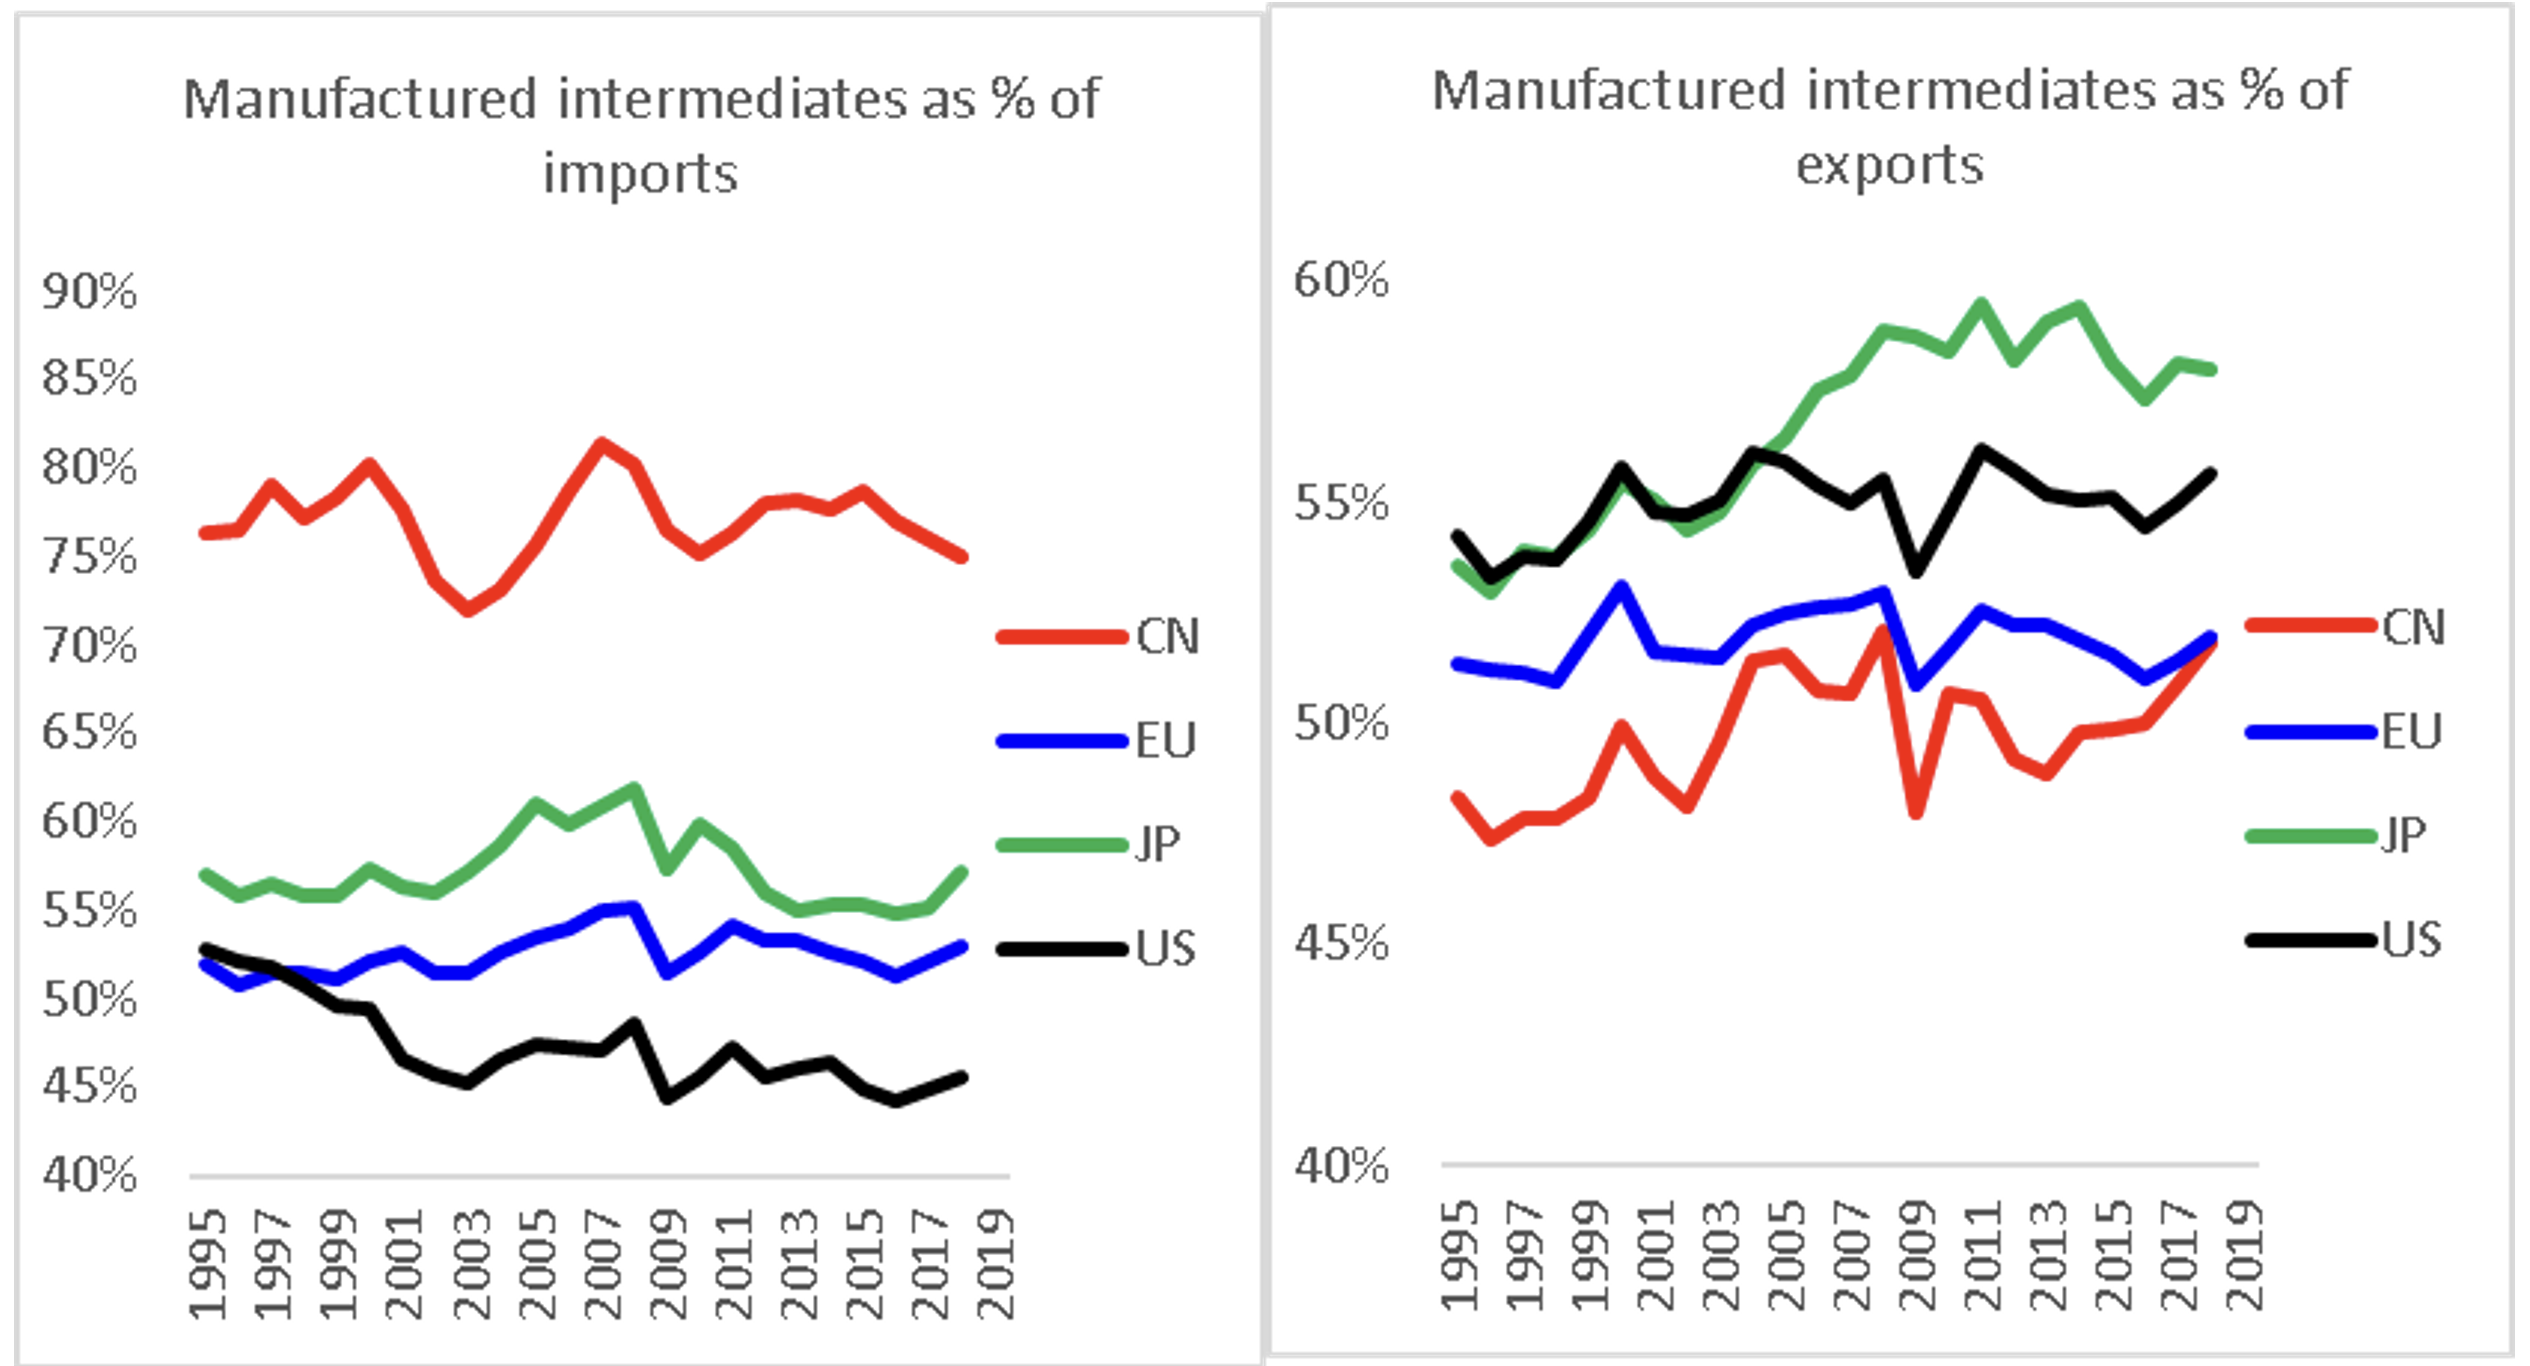 Figure 6 Share of imported manufactured goods made up of intermediate goods, 1995-2018